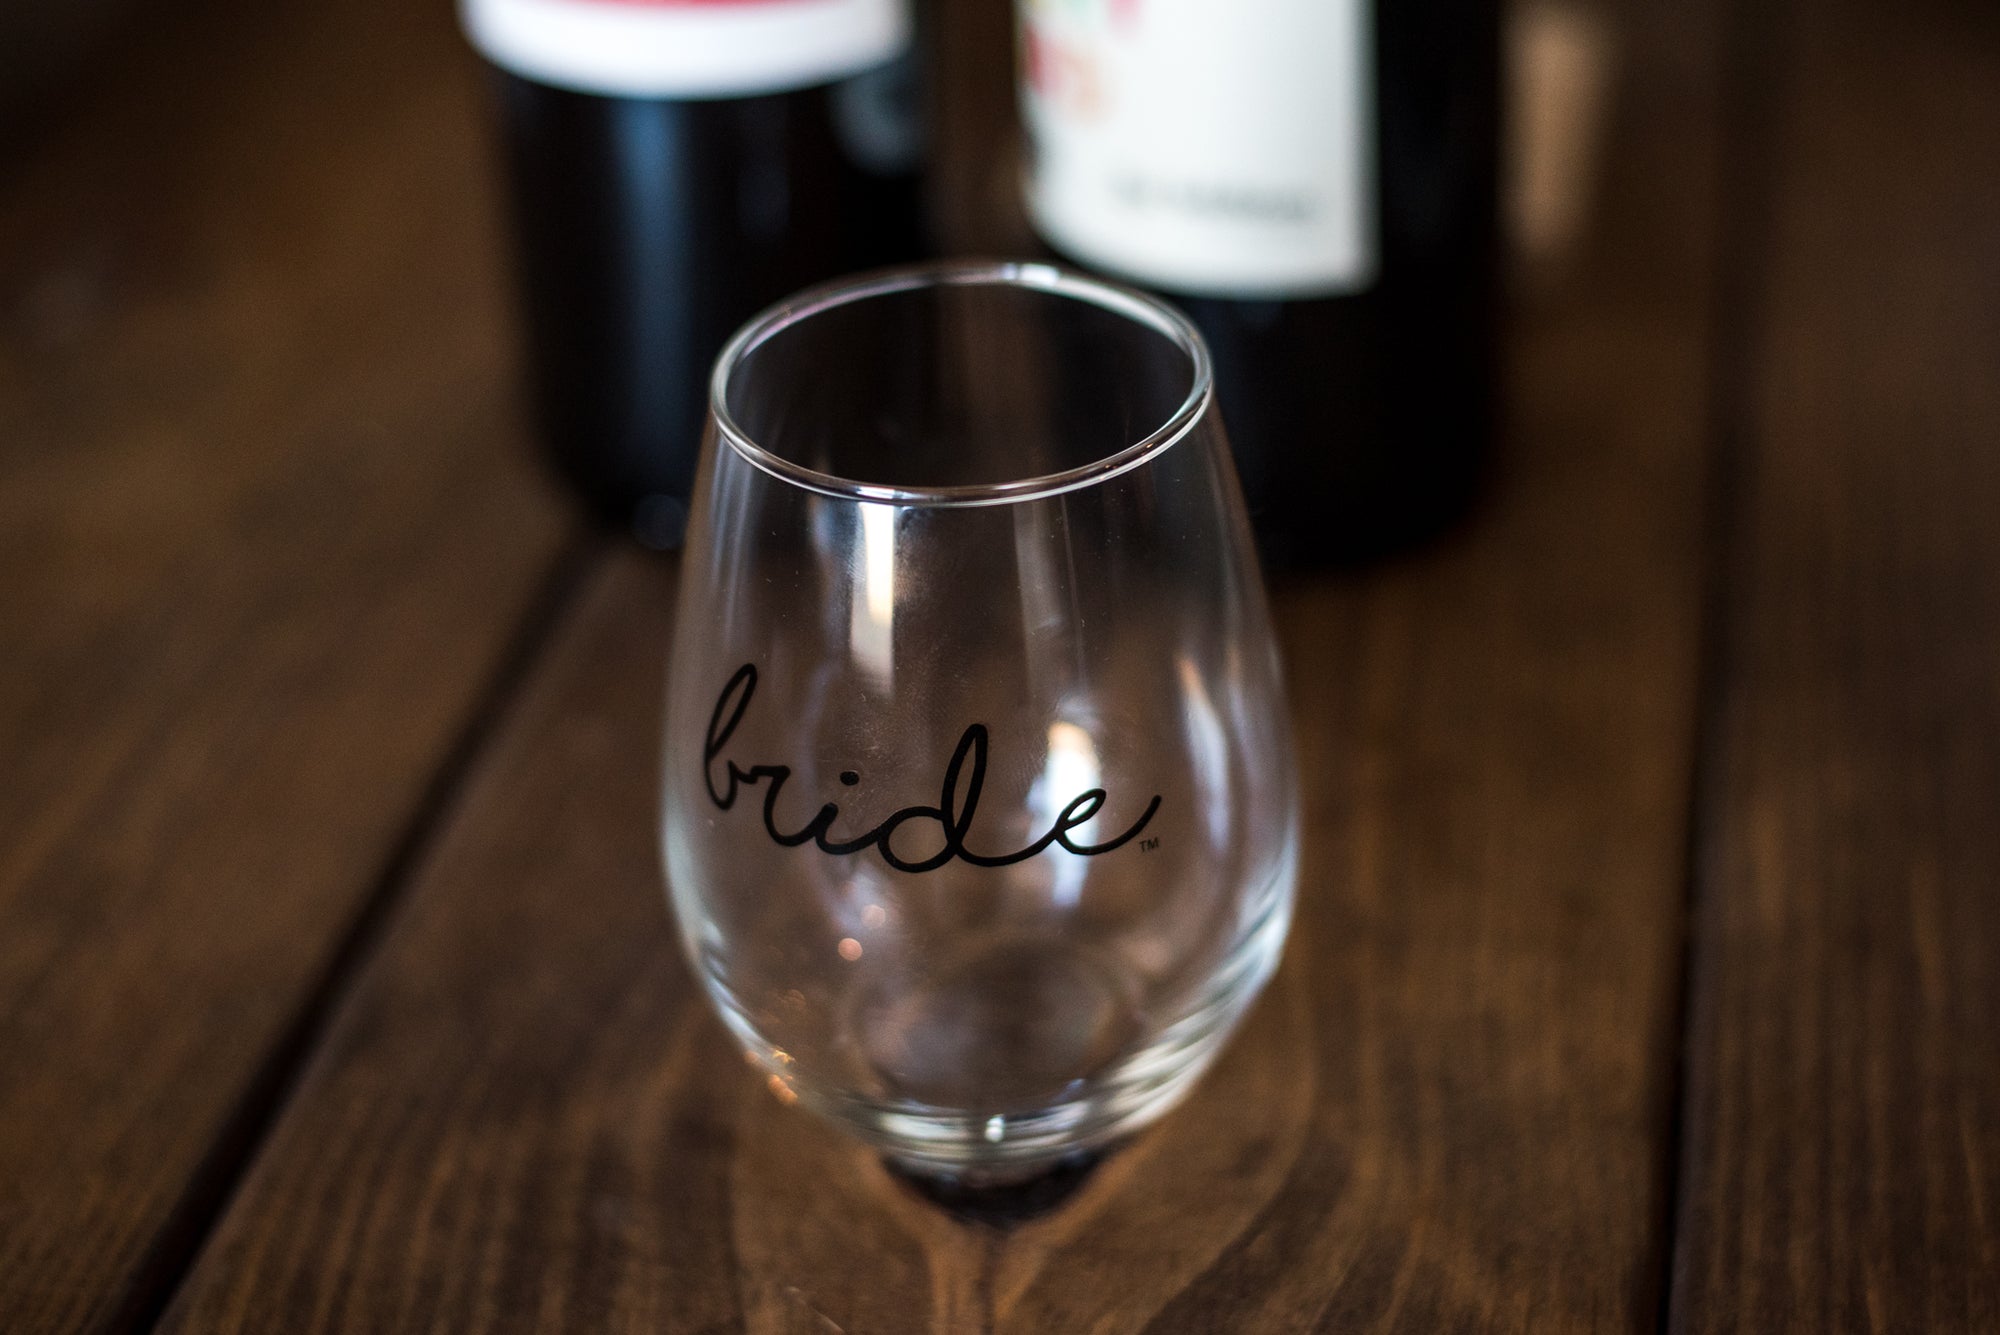 Bride script stemless wine glass - Trendy Tumblers, Mugs and Cups at Lush Fashion Lounge Boutique in Oklahoma City